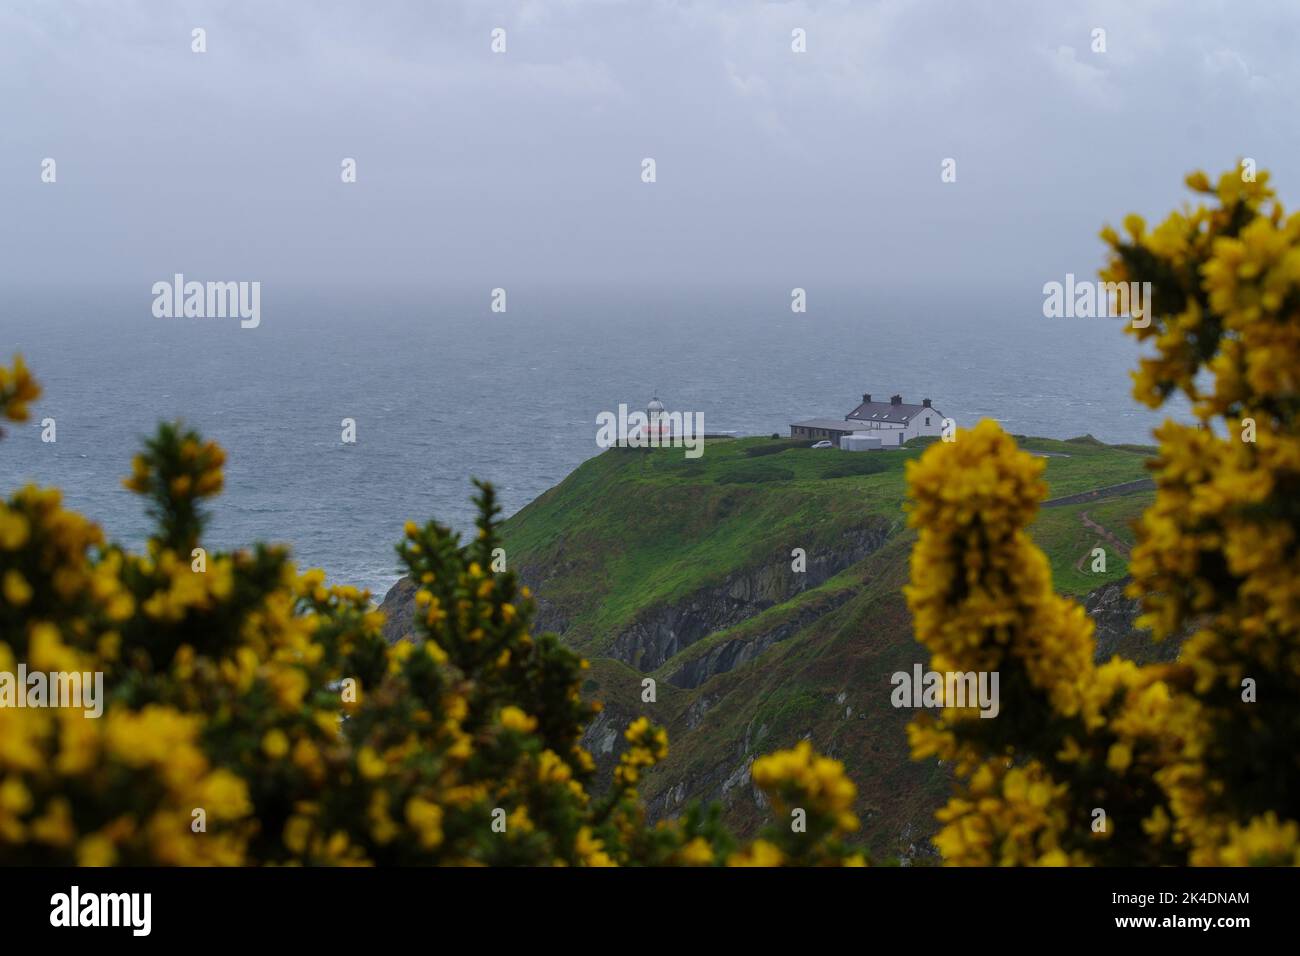 Howth Head, Ireland - May 18th 2022: Baily Lighthouse, Howth Head at bad weather shot through yellow Gorse (Ulex) Stock Photo